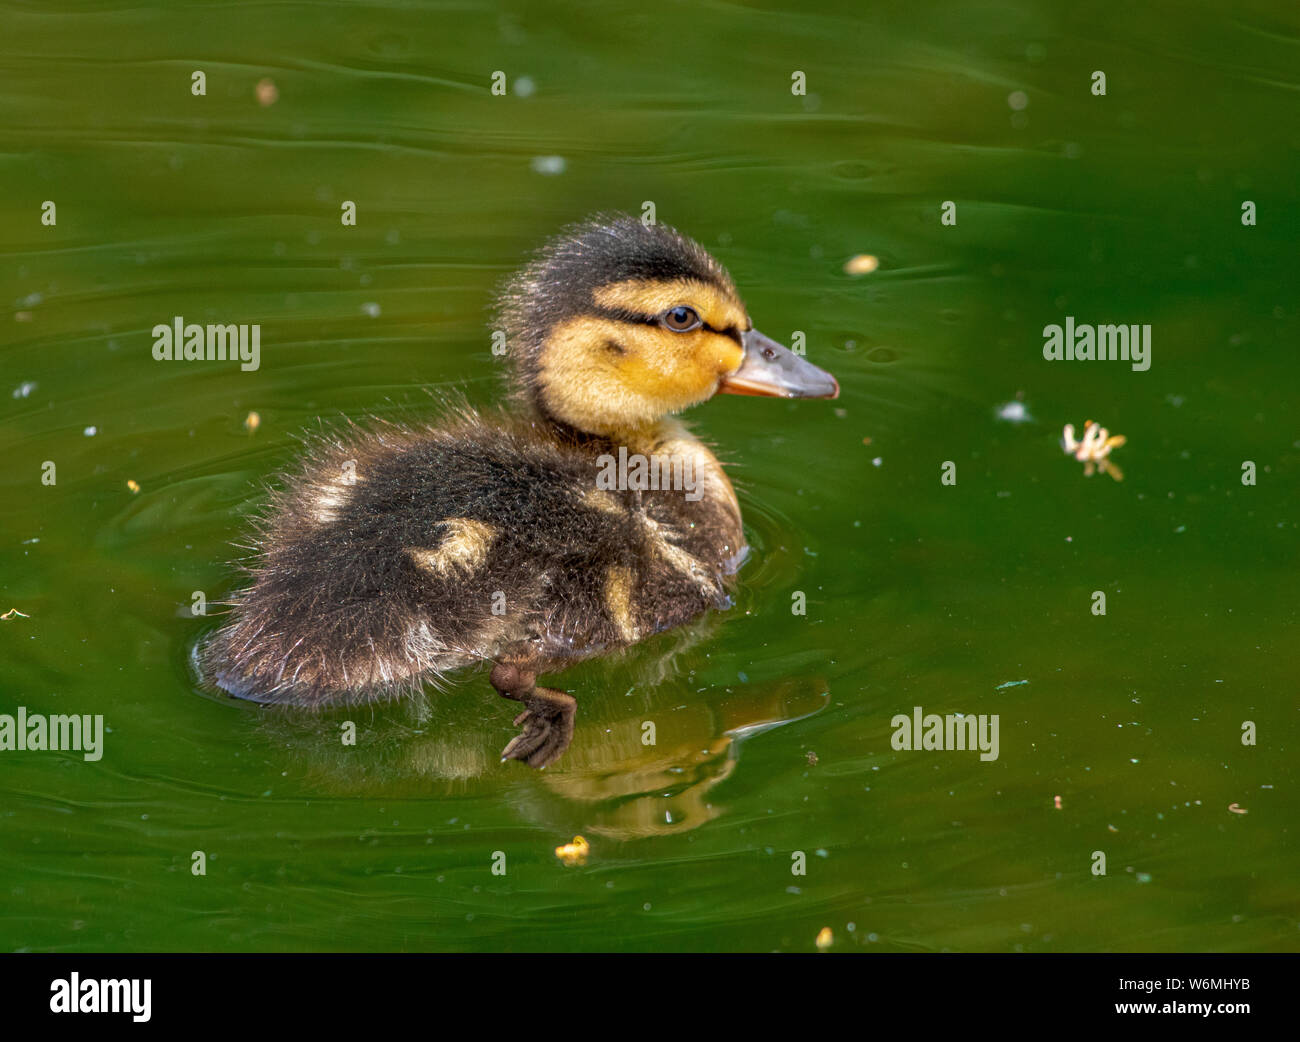 cute baby duck swimming in green pond, close up portrait Stock Photo